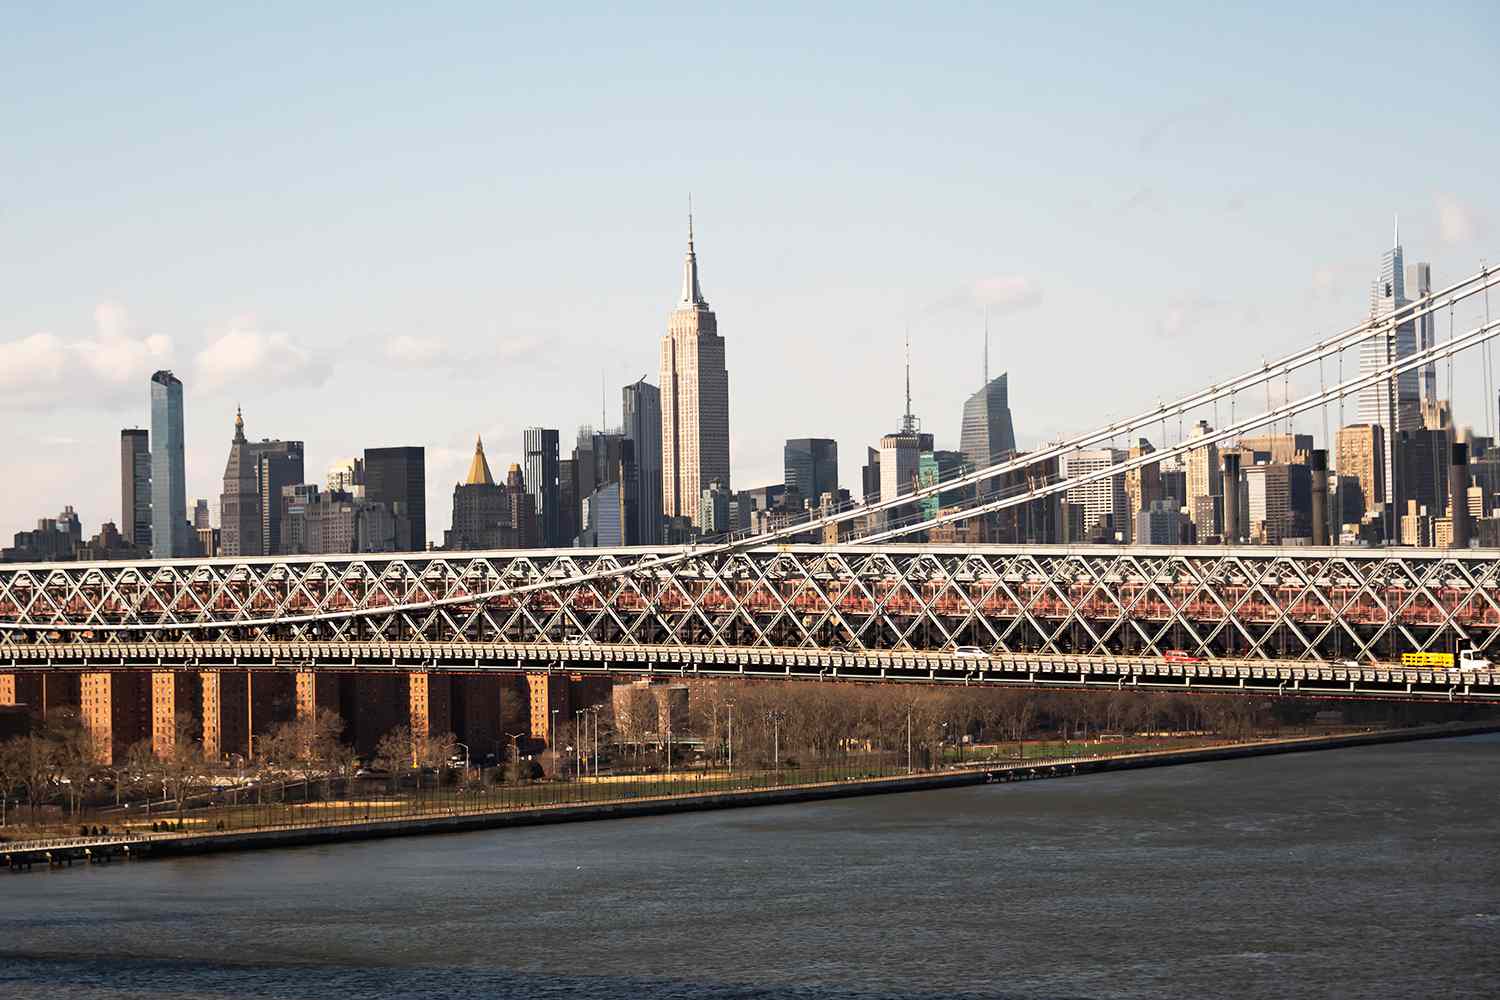 A view of Williamsburg Bridge and Midtown NYC on March 14, 2021 in New York City.